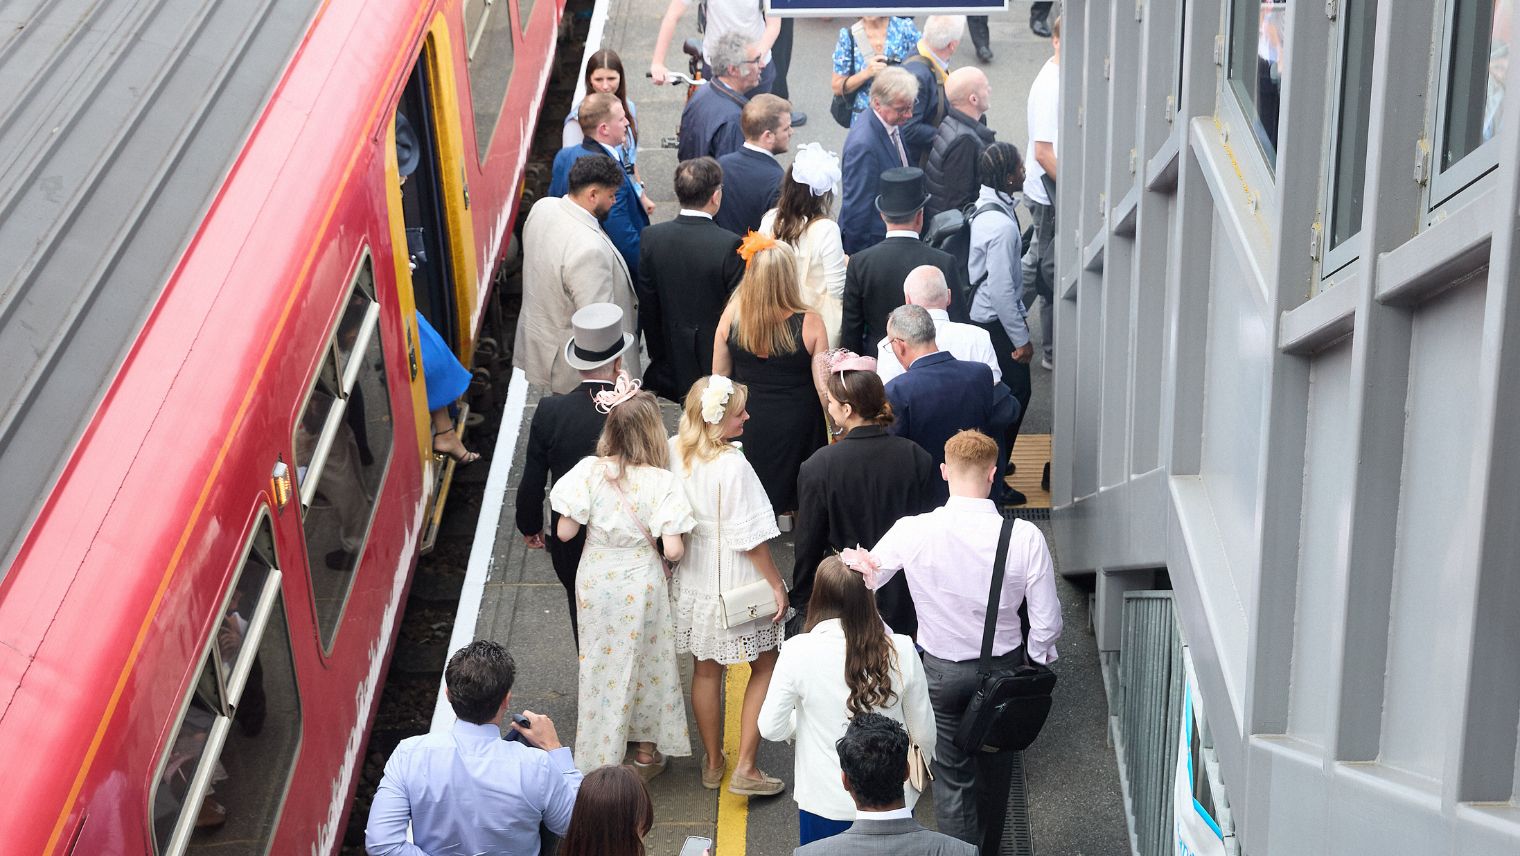 Crowds leaving train at Ascot station seen from above